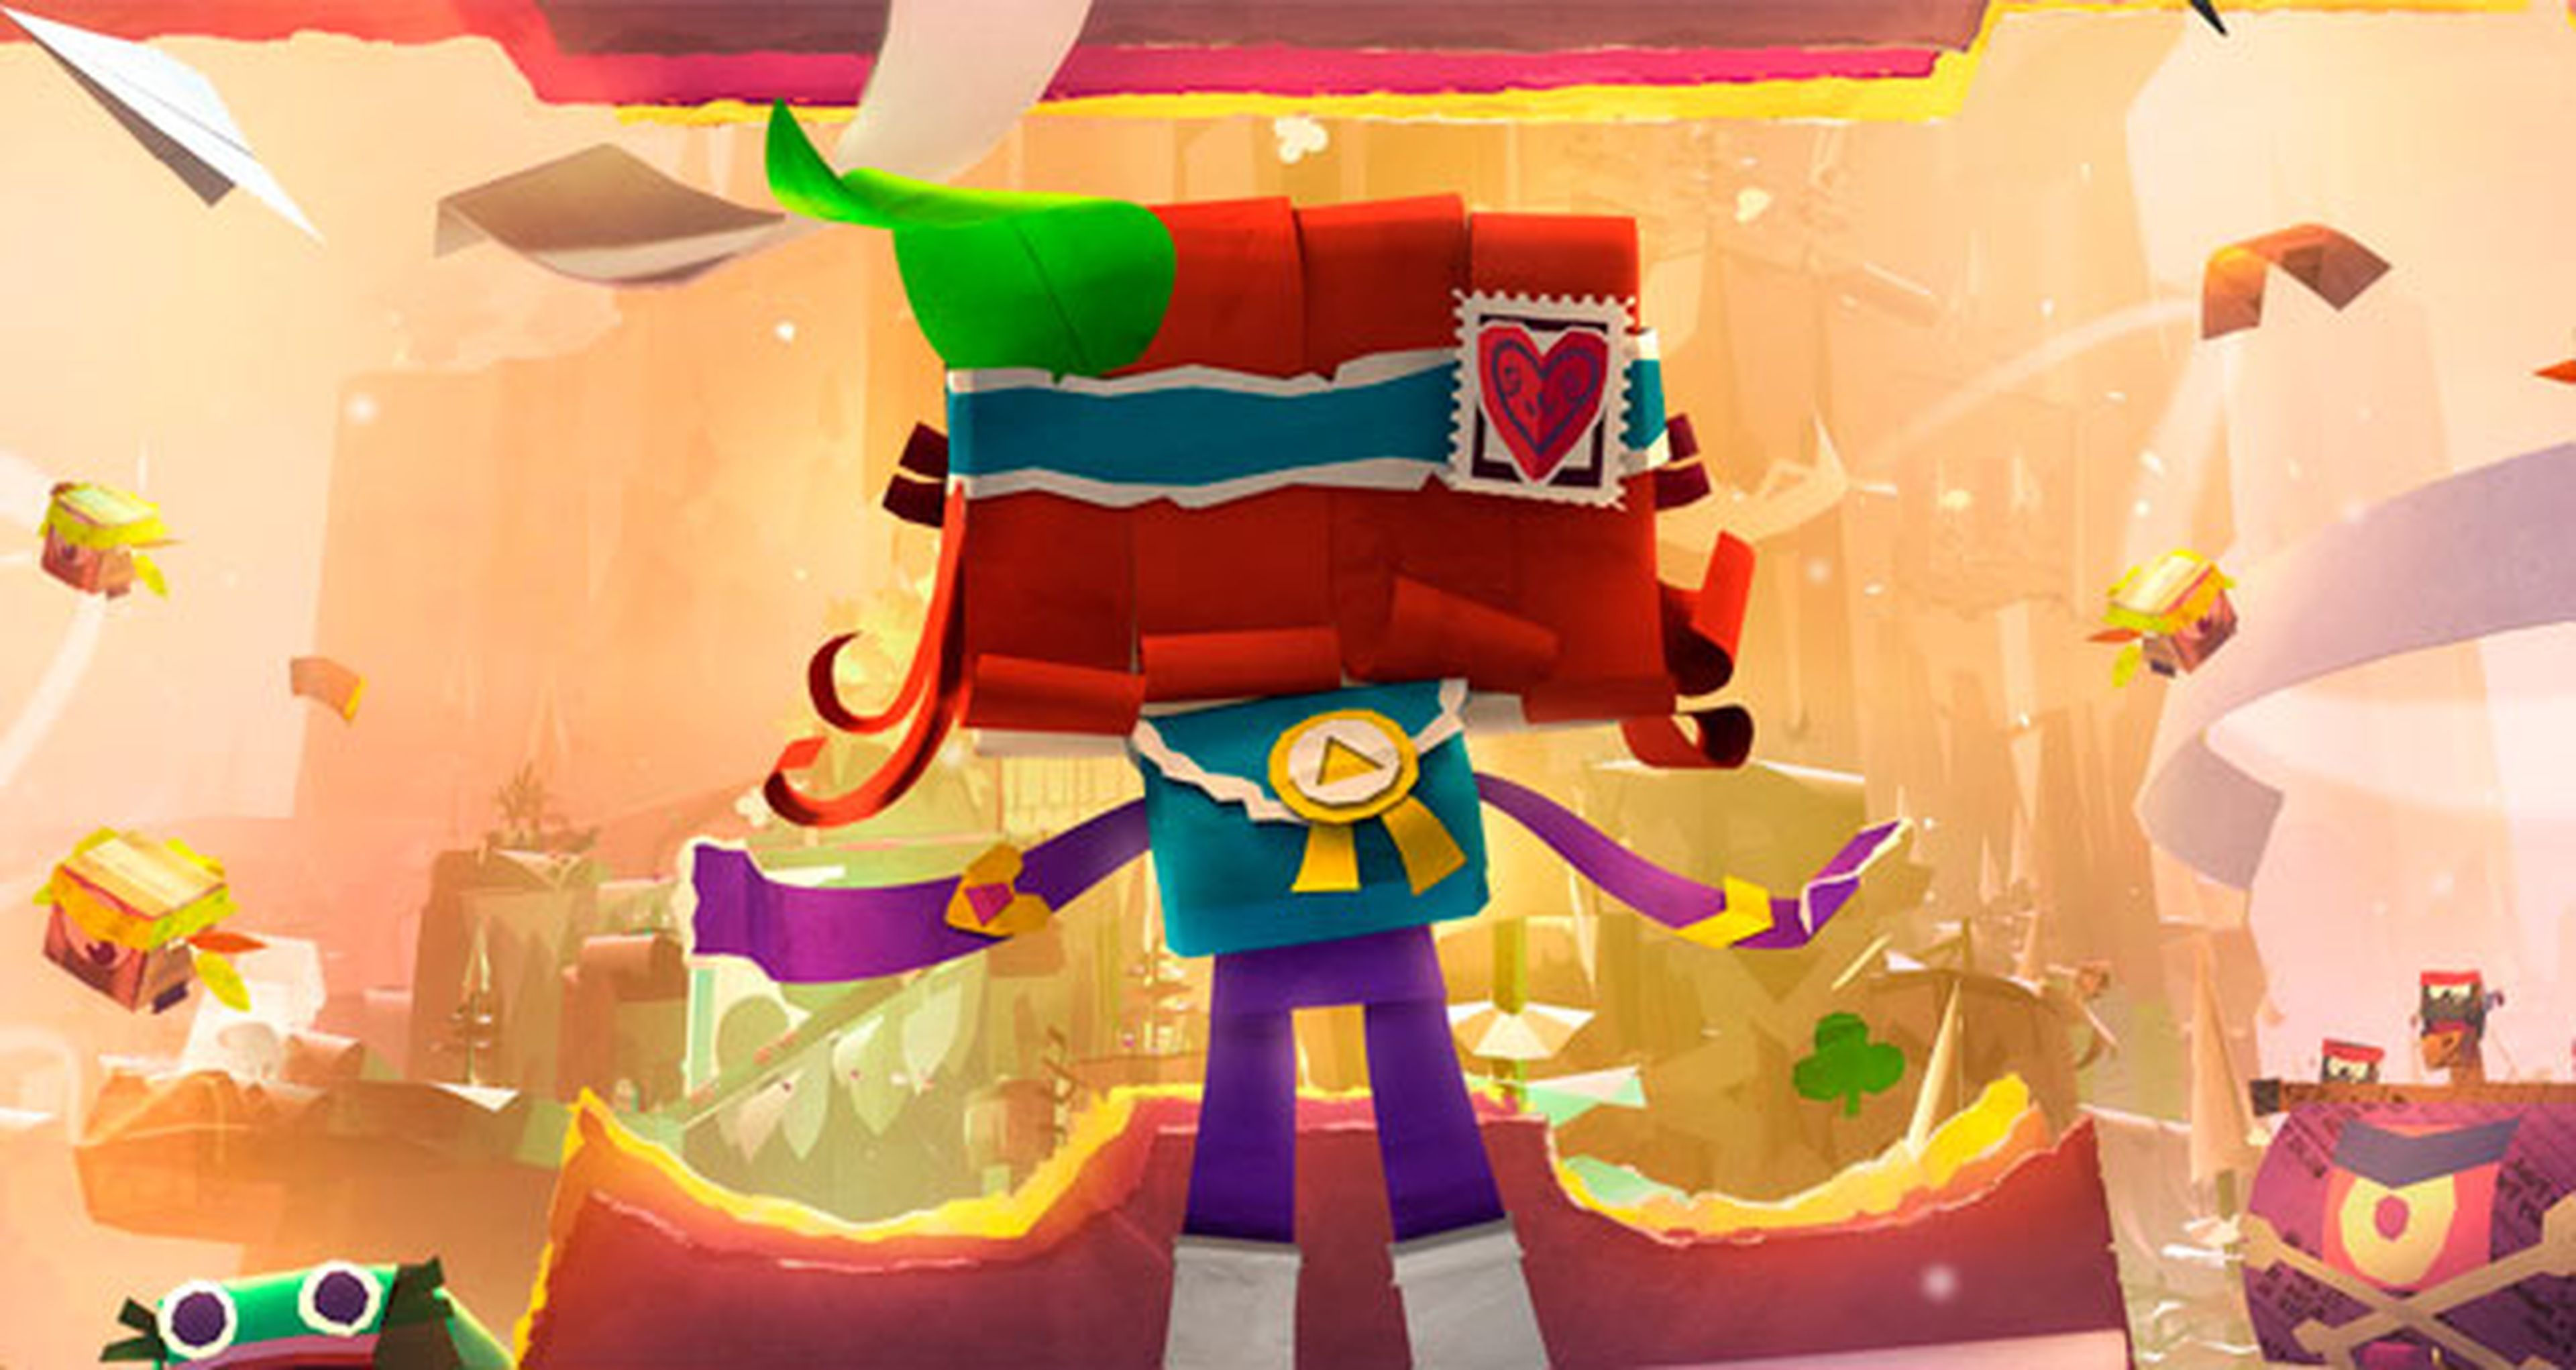 Tearaway Unfolded Messenger Edition, disponible solo en GAME